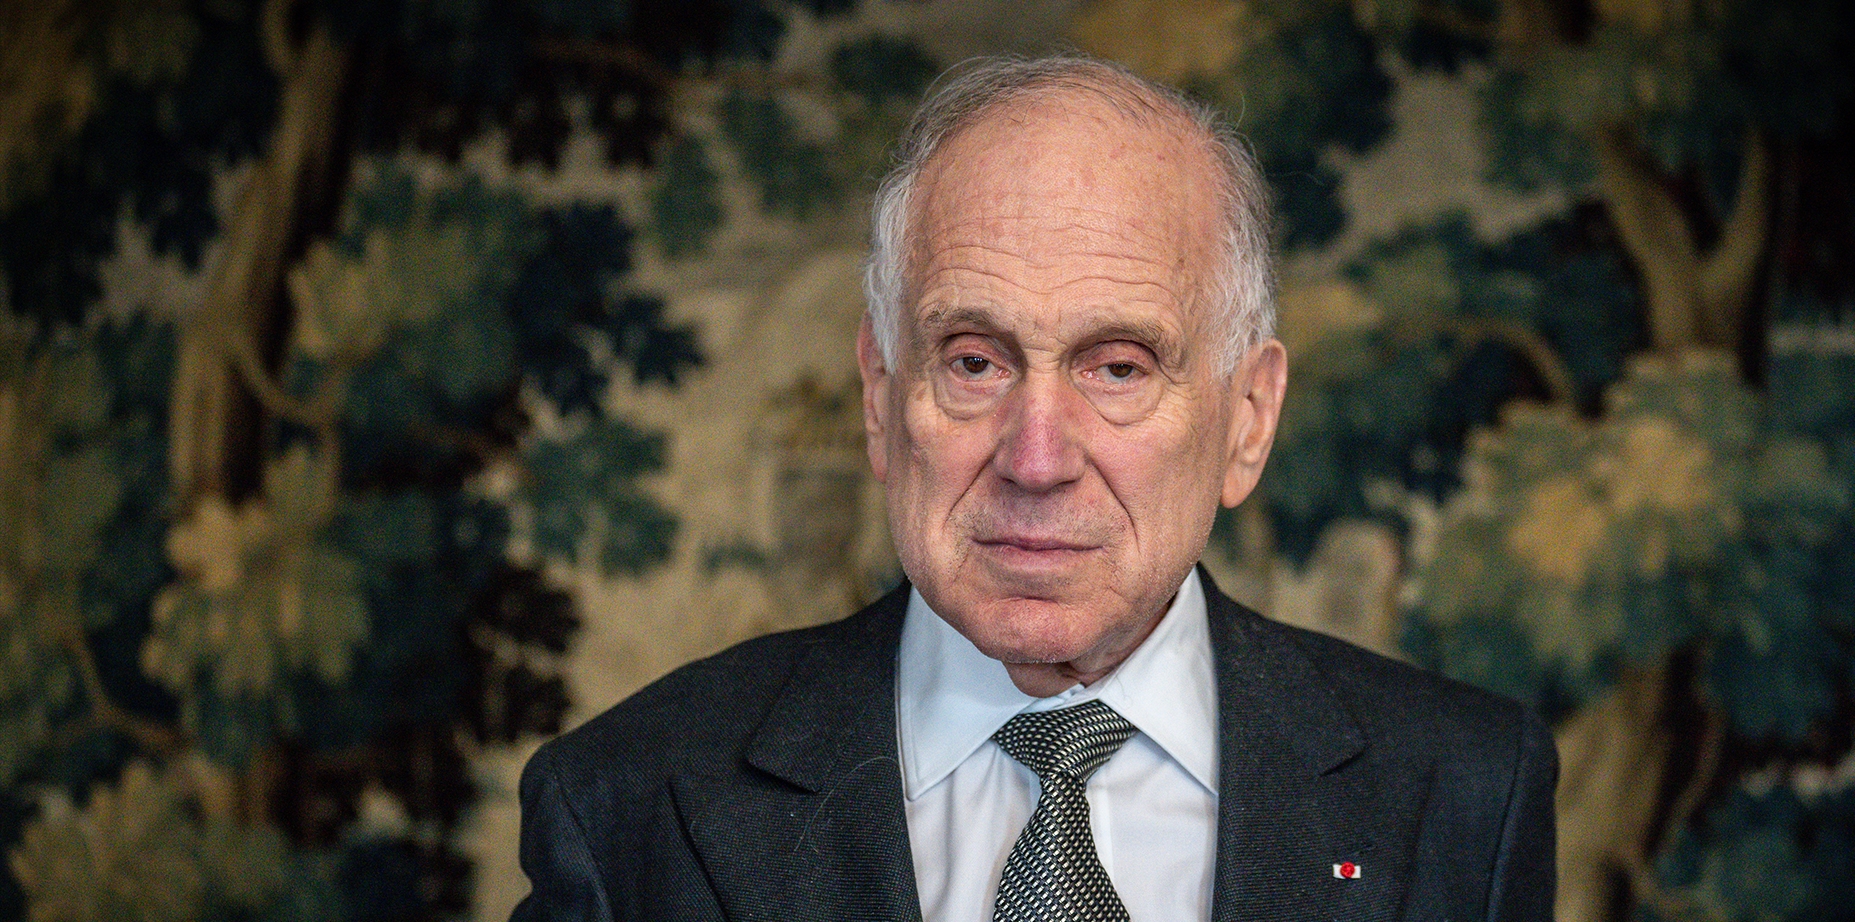 Ronald S Lauder, President of the World Jewish Congress (WJC) recorded before a bilateral a conversation with Chancellor Scholz. (Michael Kappeler/Getty Images)